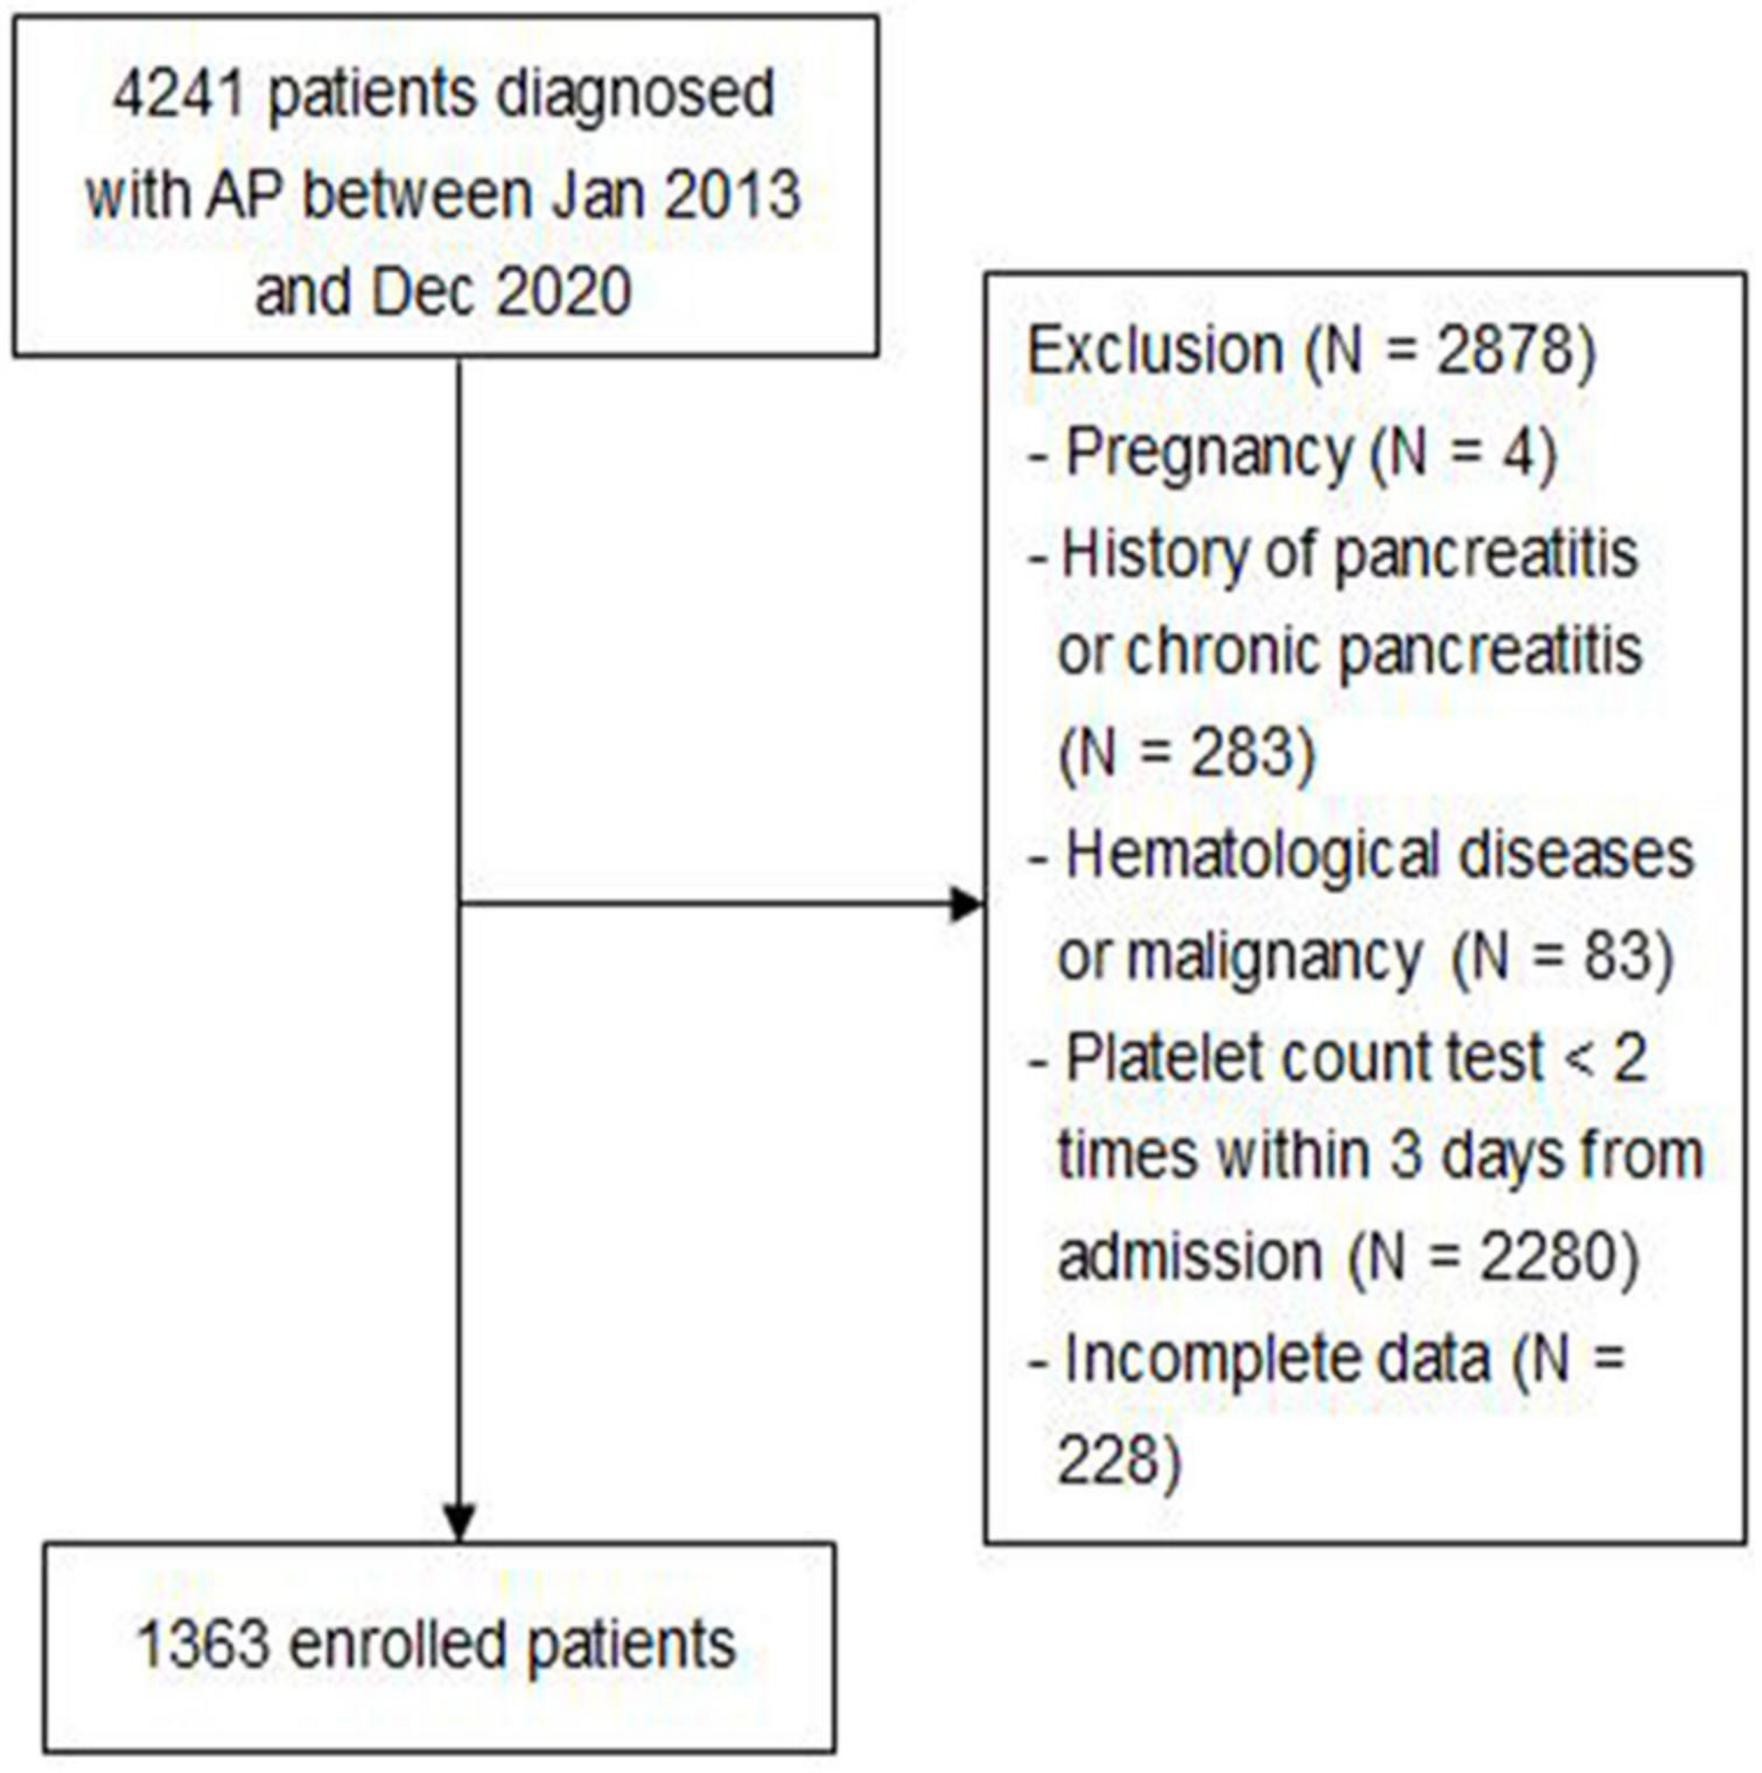 Moderate level platelet count might be a good prognostic indicator for intra-abdominal infection in acute pancreatitis: A retrospective cohort study of 1,363 patients